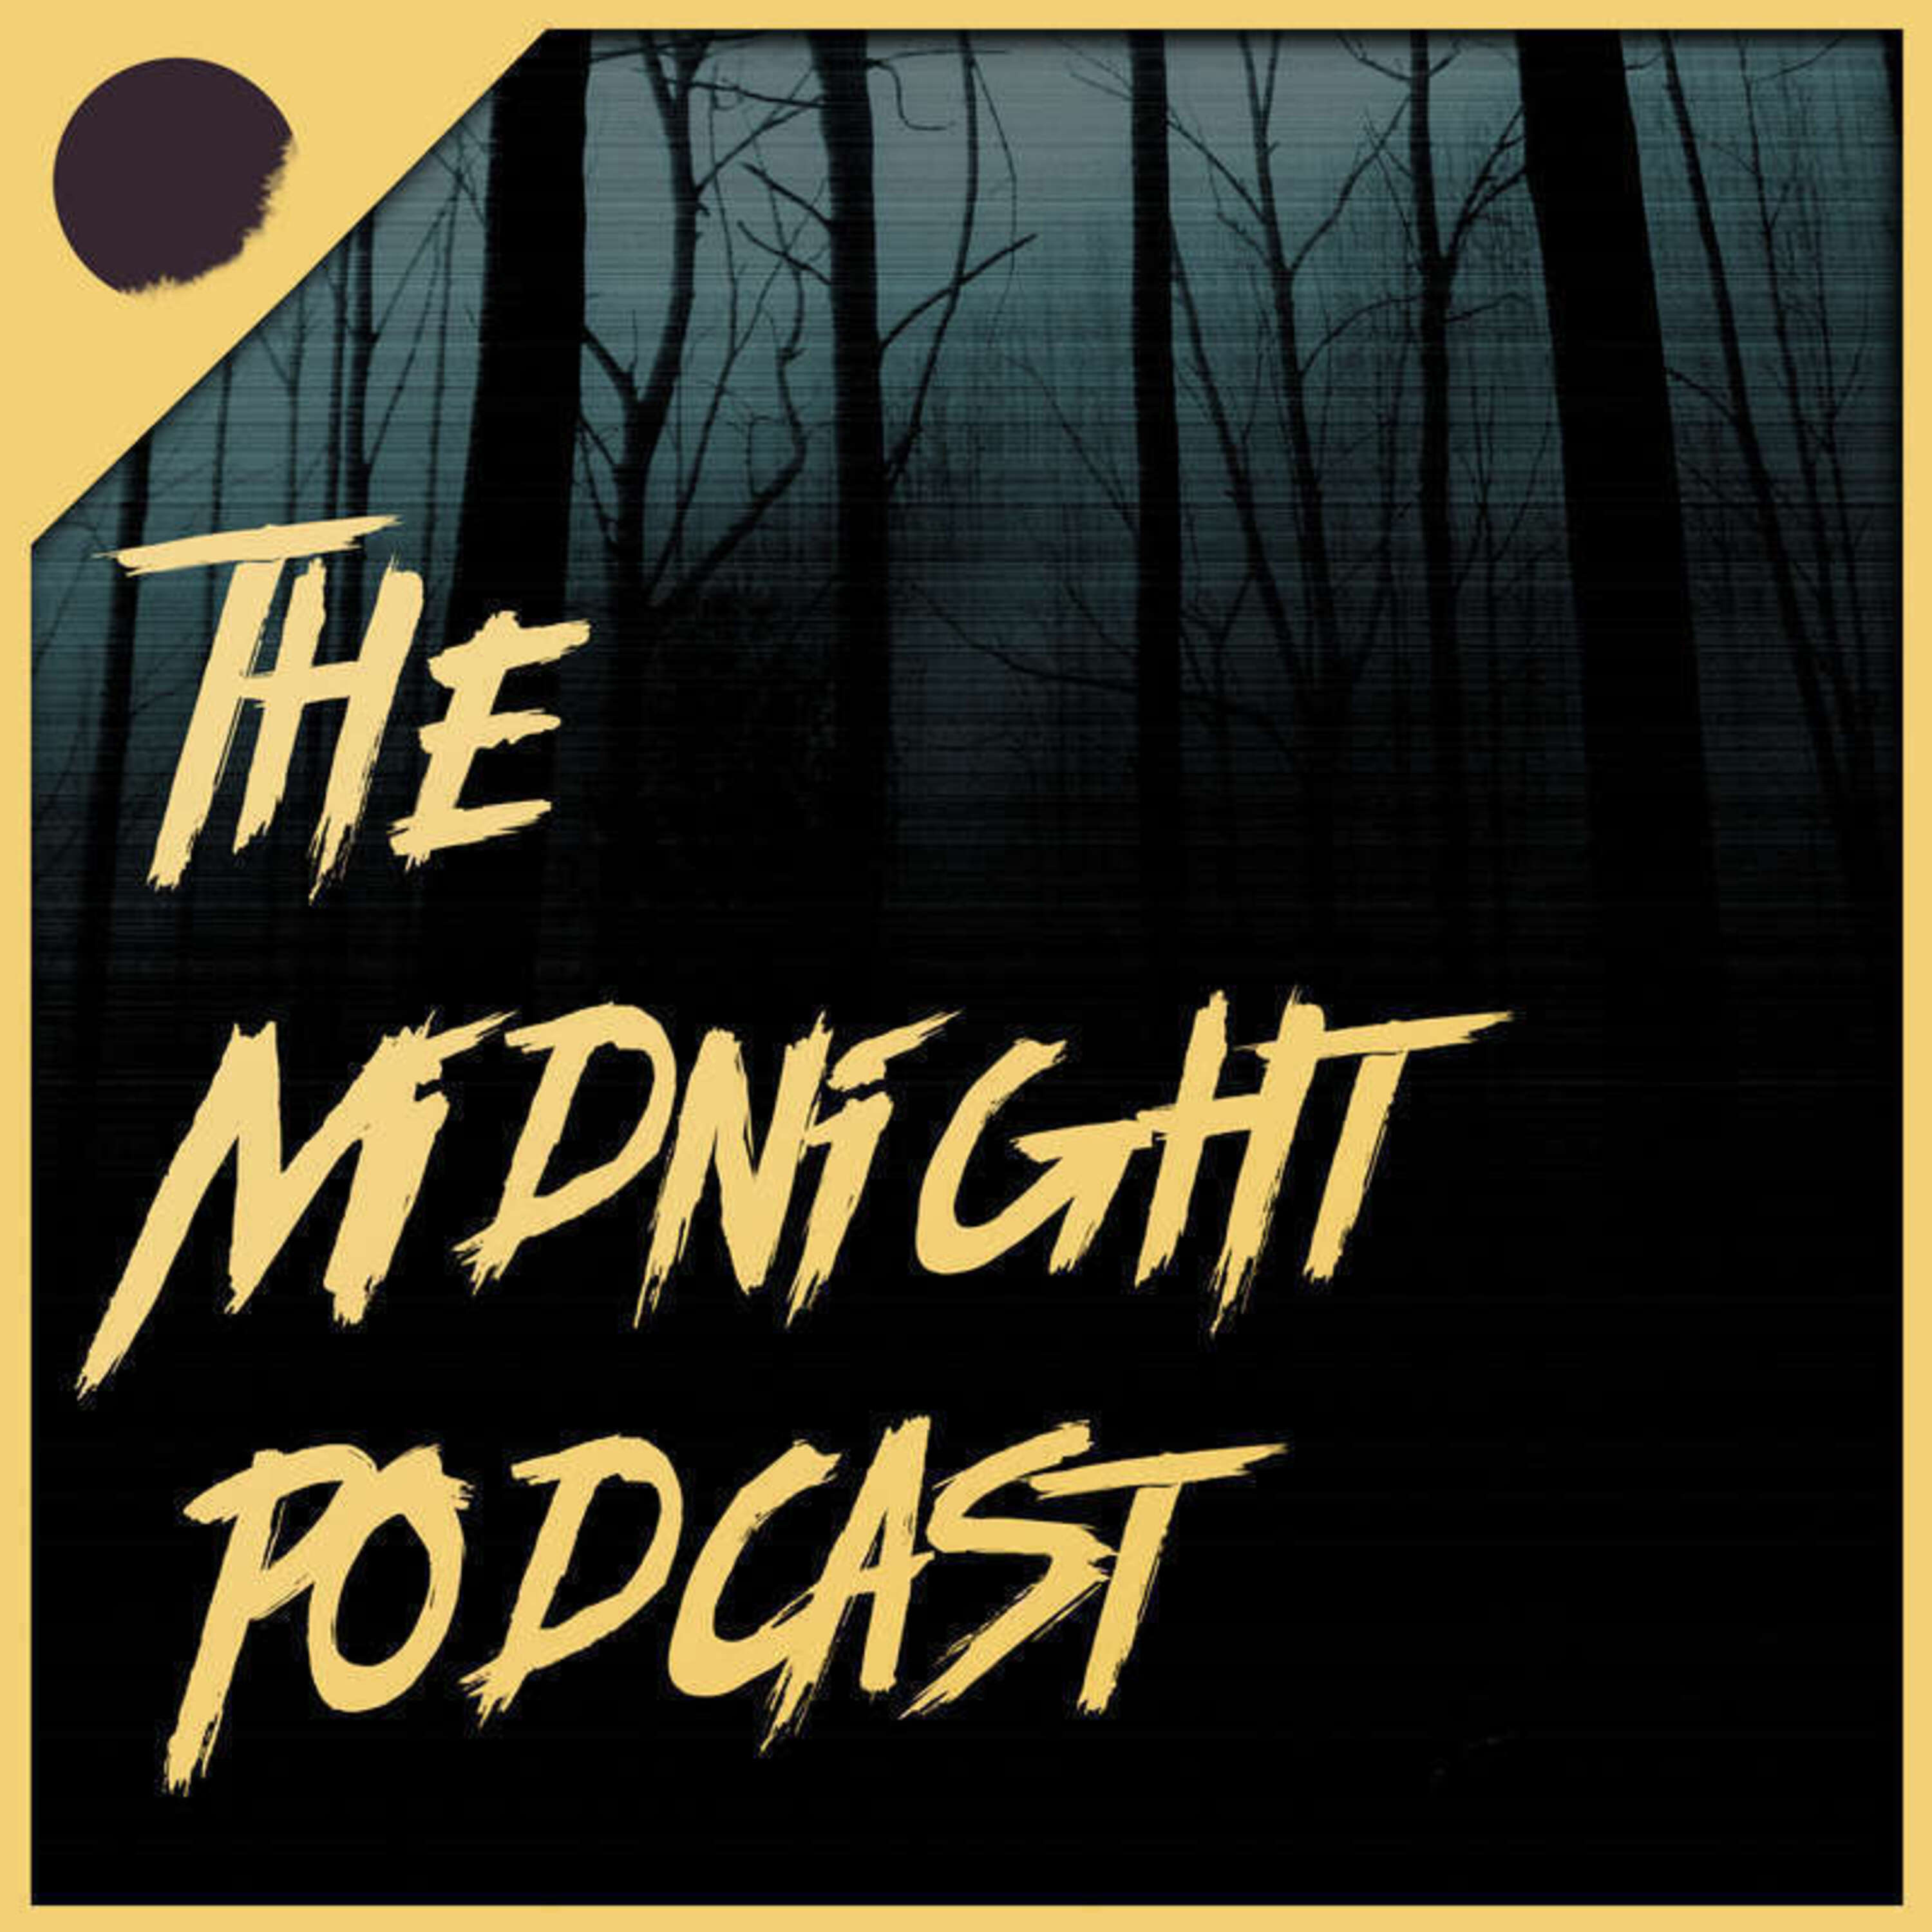 Episode 117 | There's a strange newspaper that's only delivered at midnight [Pt. 1-2]